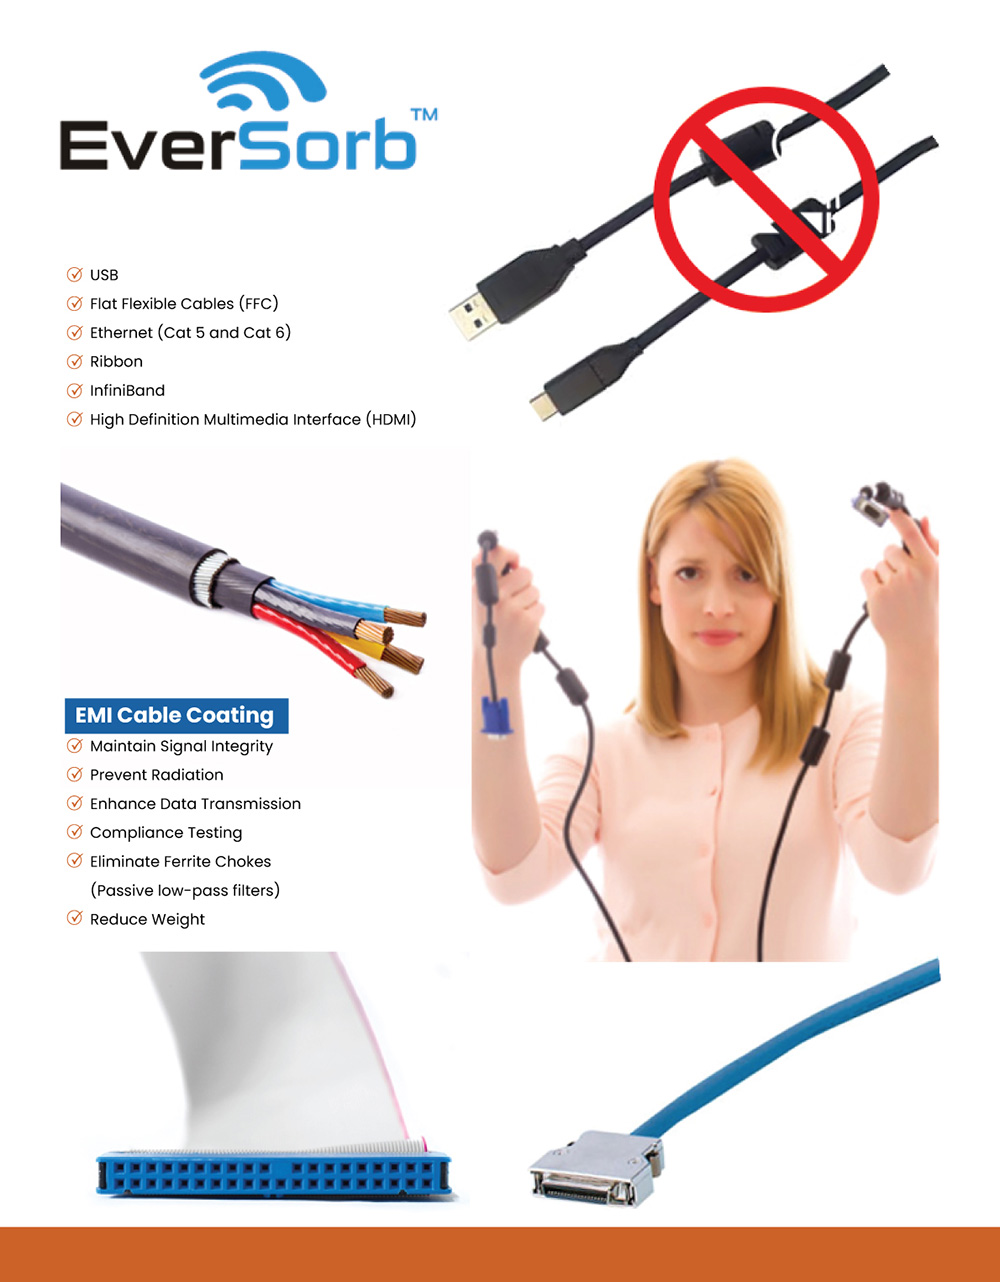 EverSorb CC Cable Coating